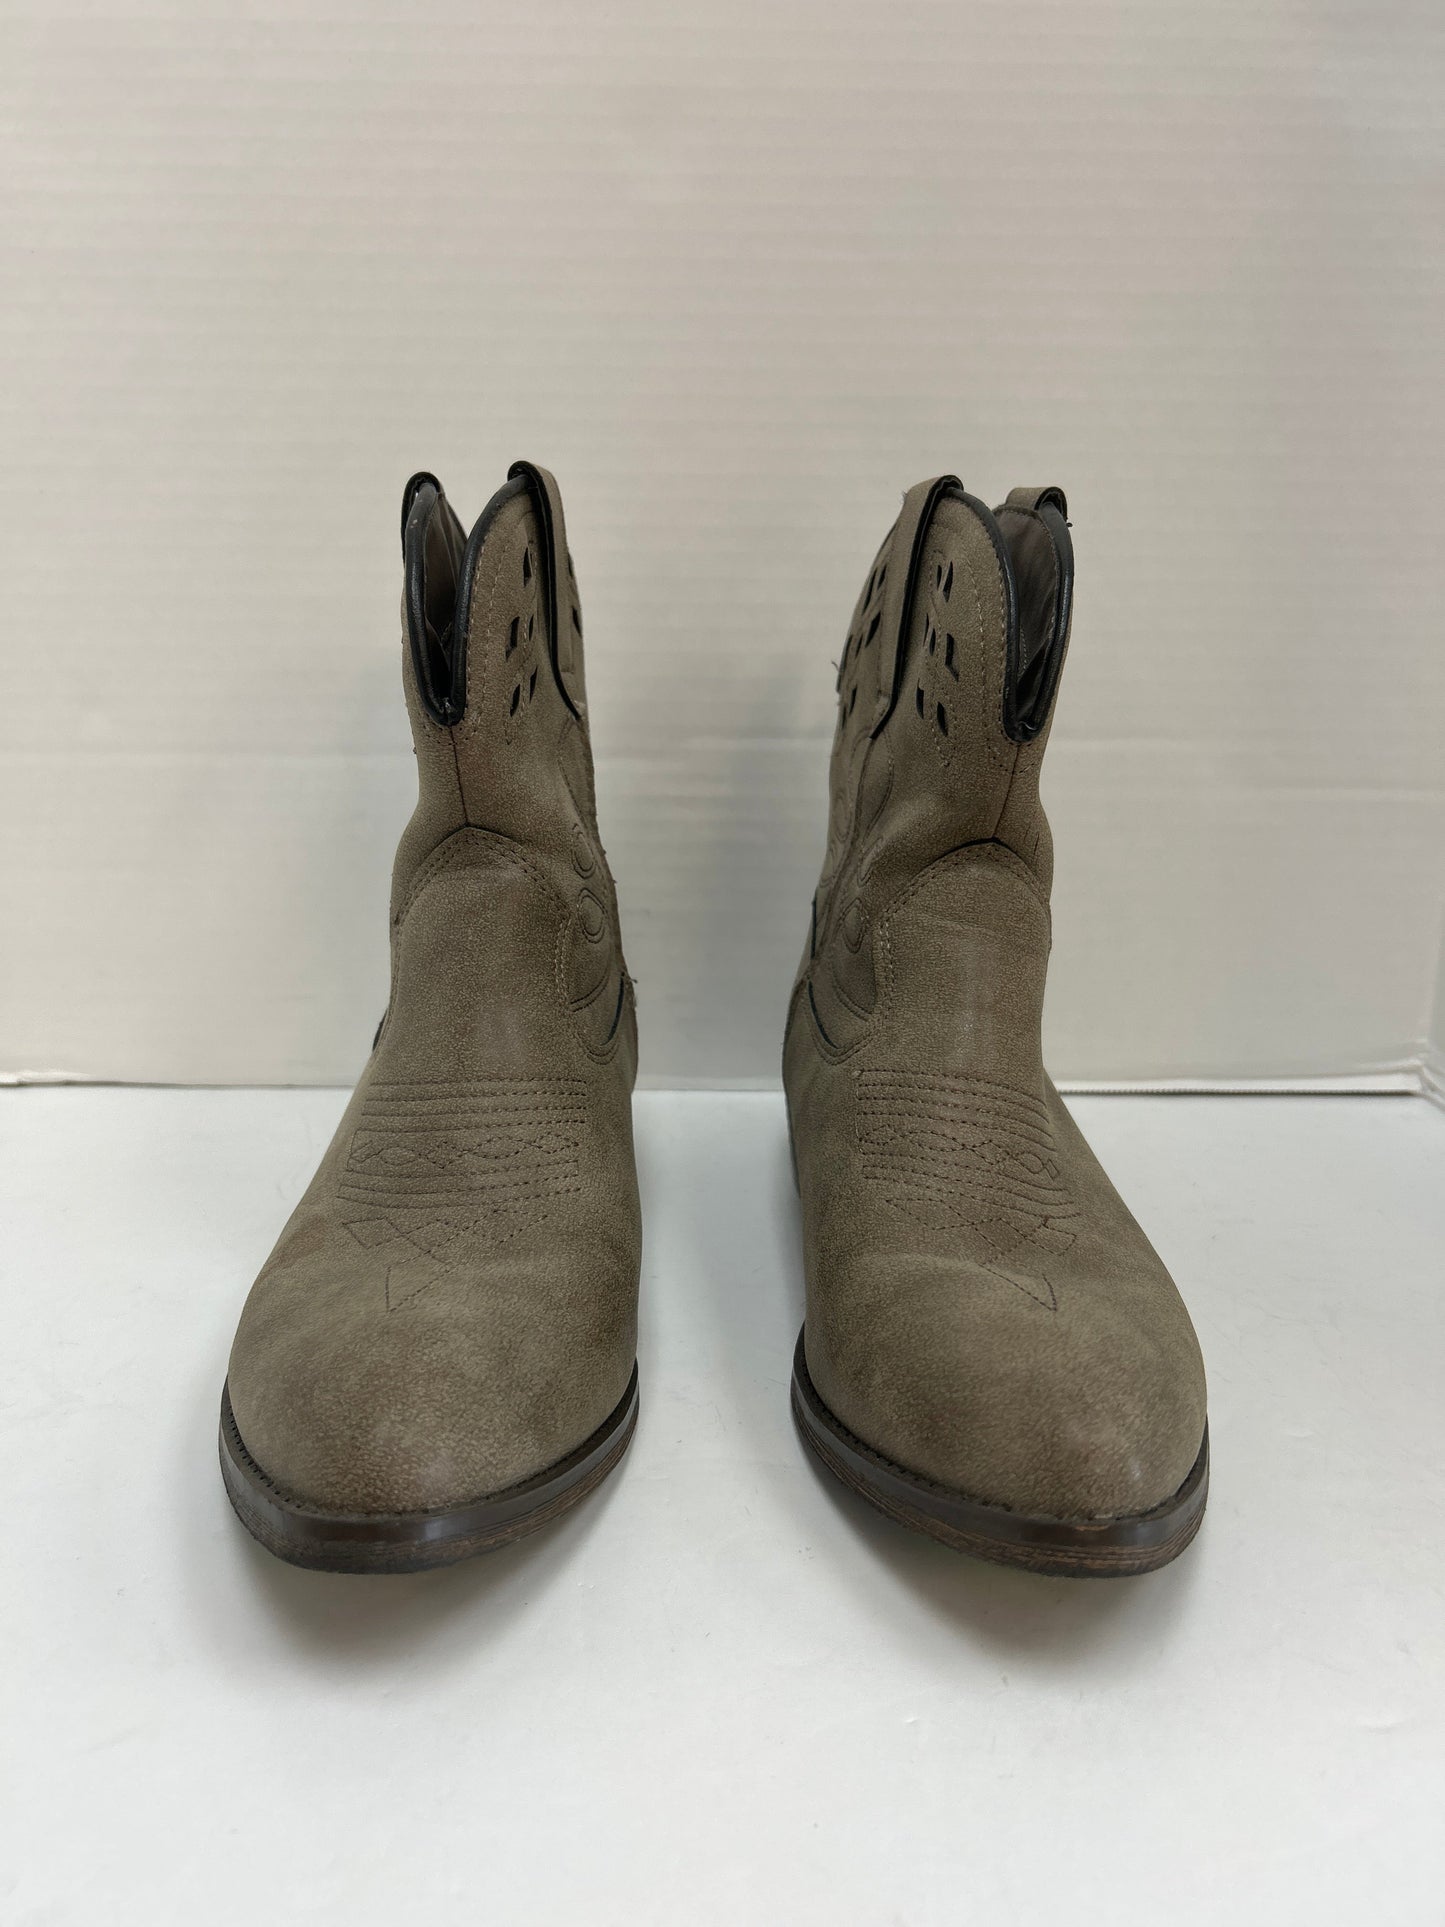 Boots Western By Mossimo  Size: 8